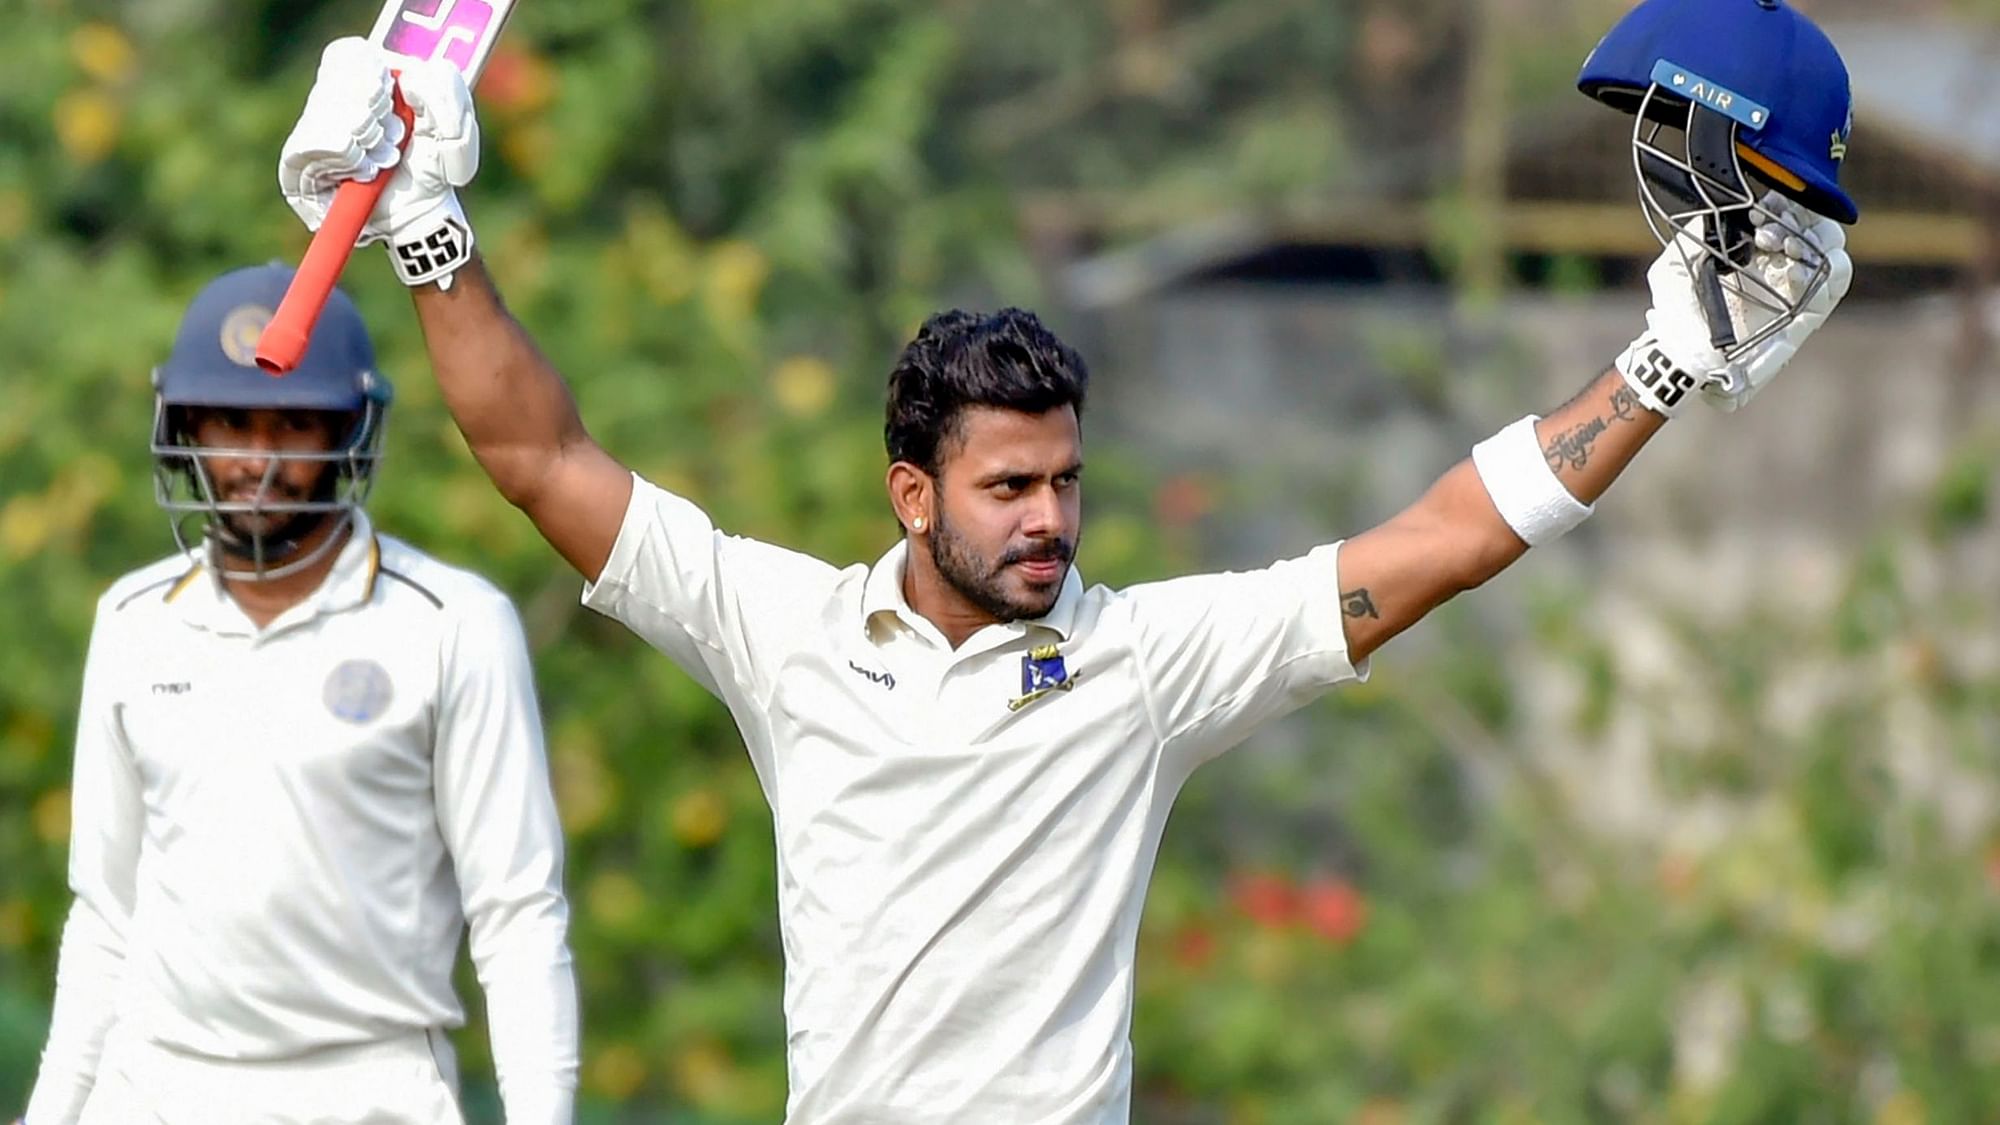 Bengal cricketers are yet to get the Rs 1 crore from the BCCI for finishing runners-up in the Ranji Trophy last season.